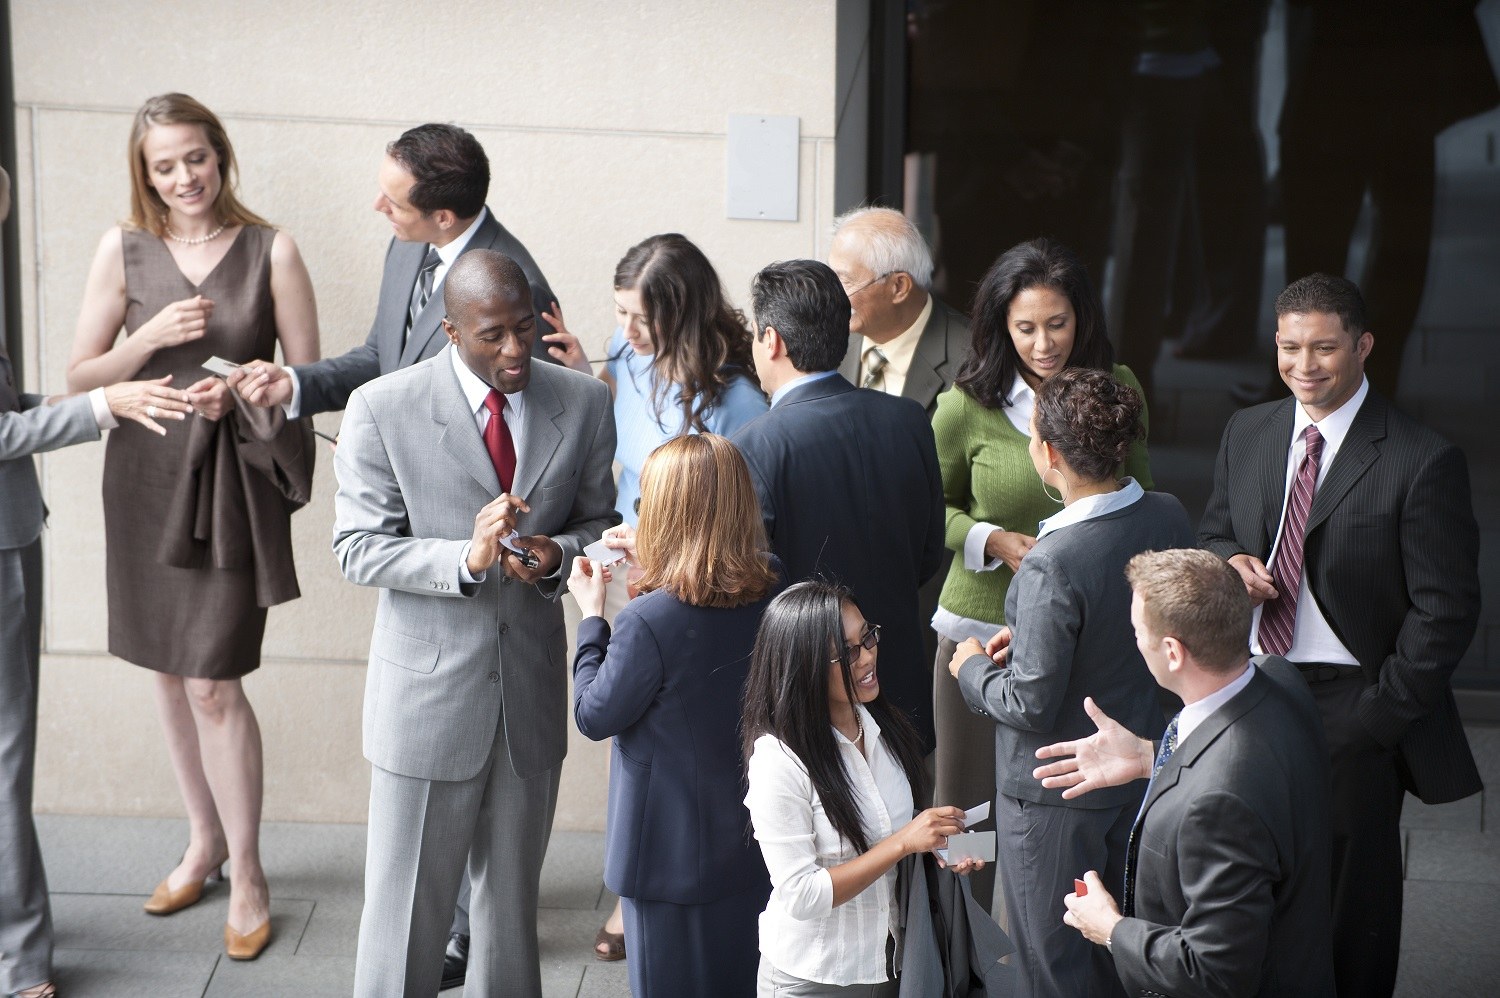 How Private Equity Firms Can Make the Most Out of Conference Networking